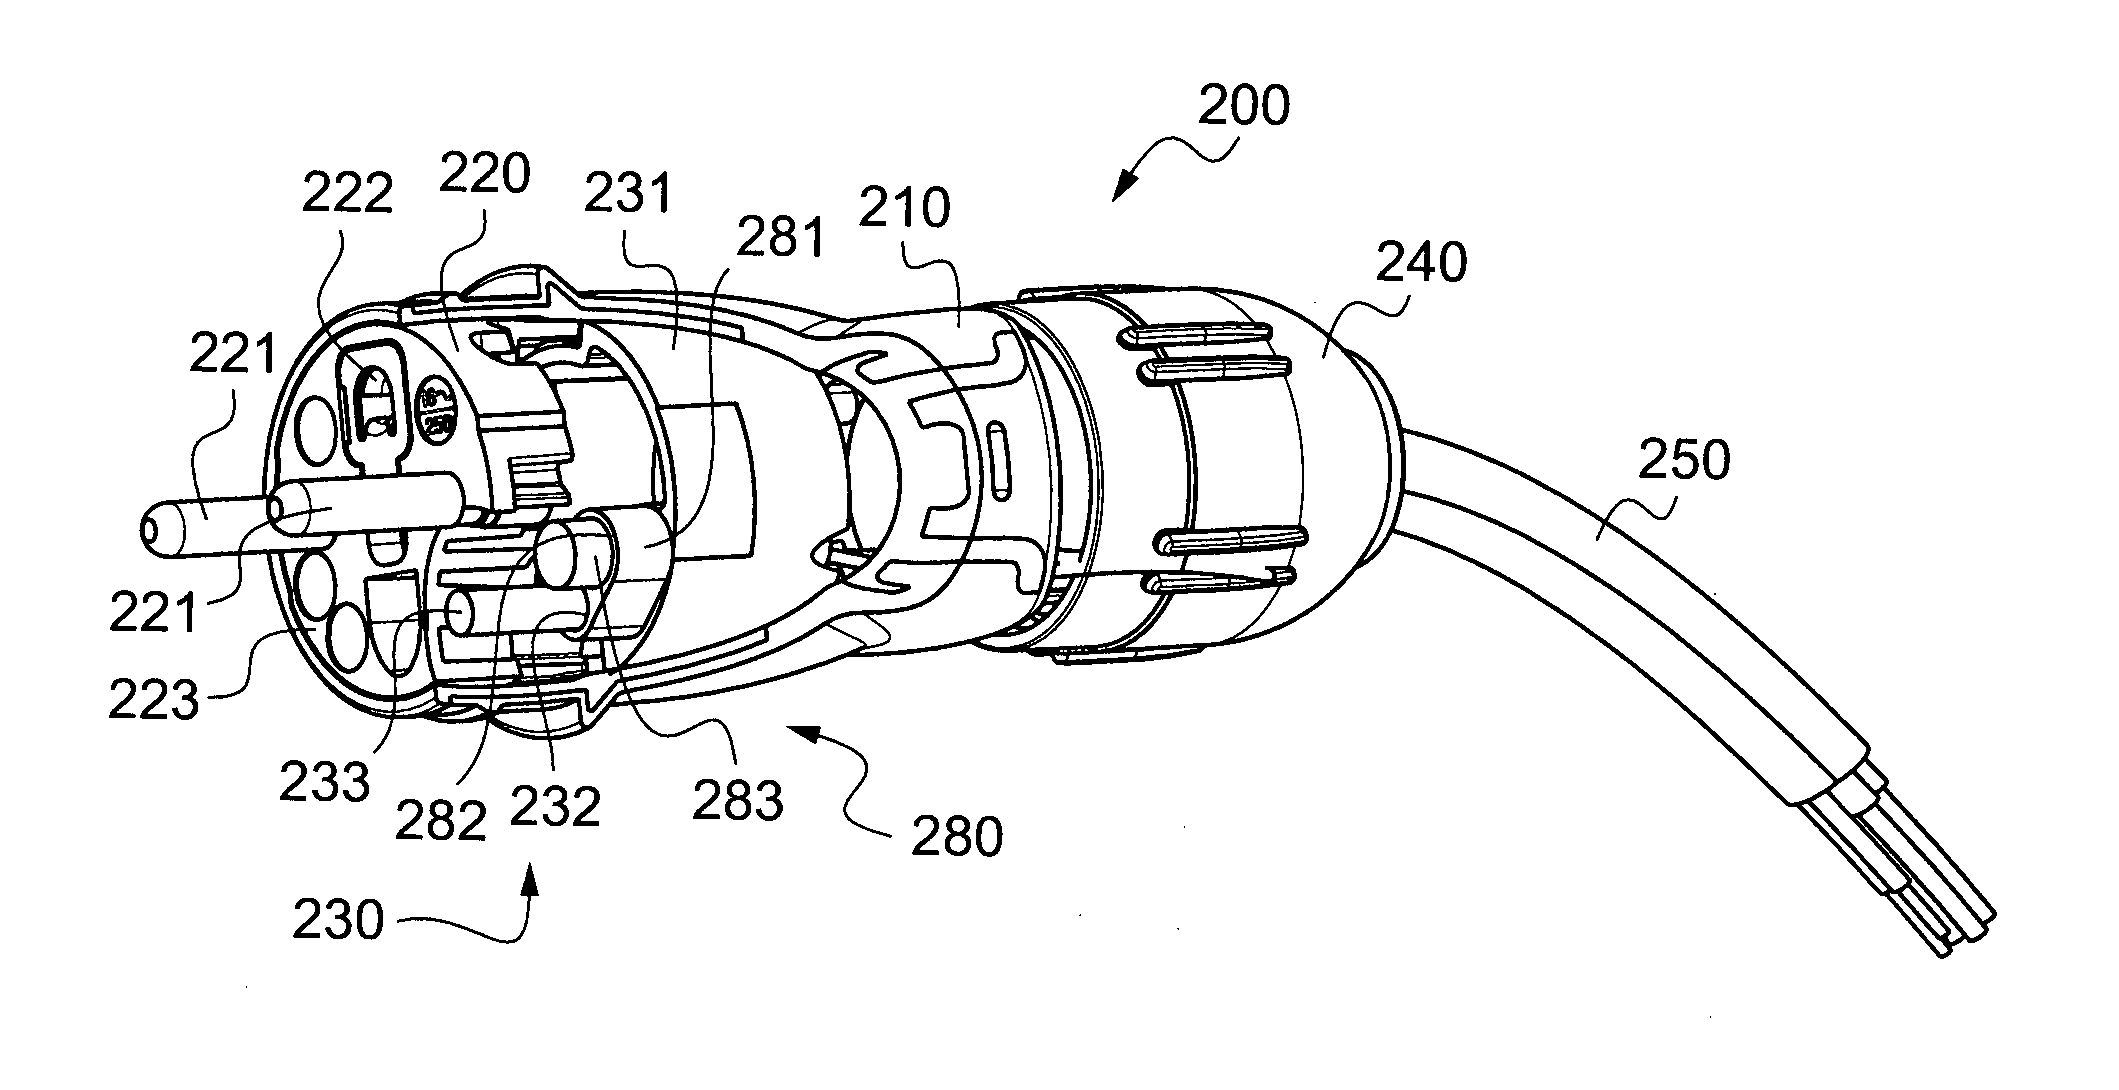 Electrical plug and associated electrical assembly